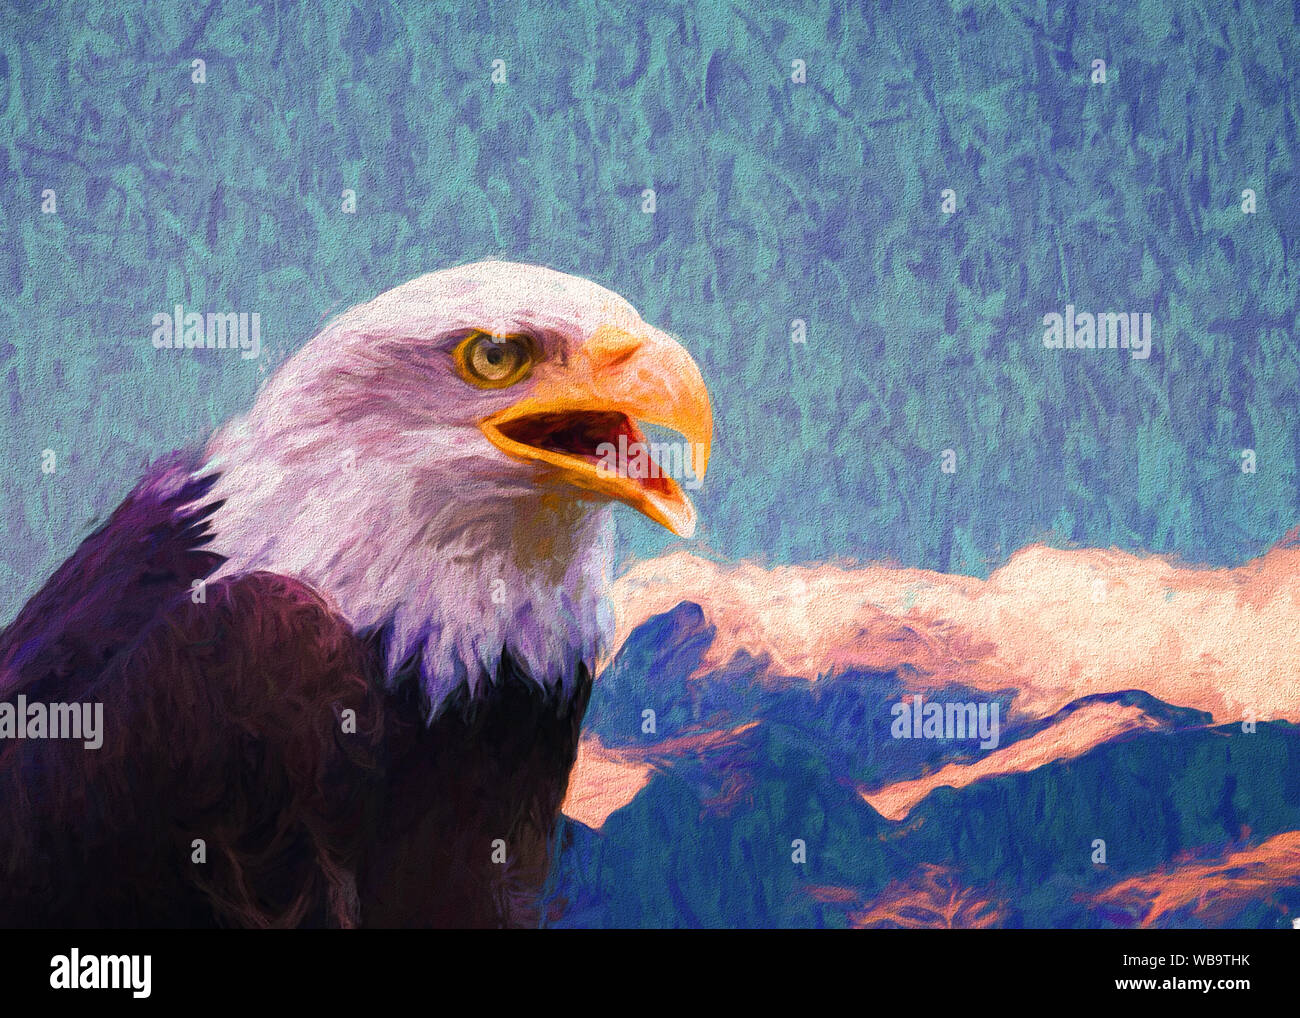 Portrait of Bald Eagle in high mountains, painting. Stock Photo